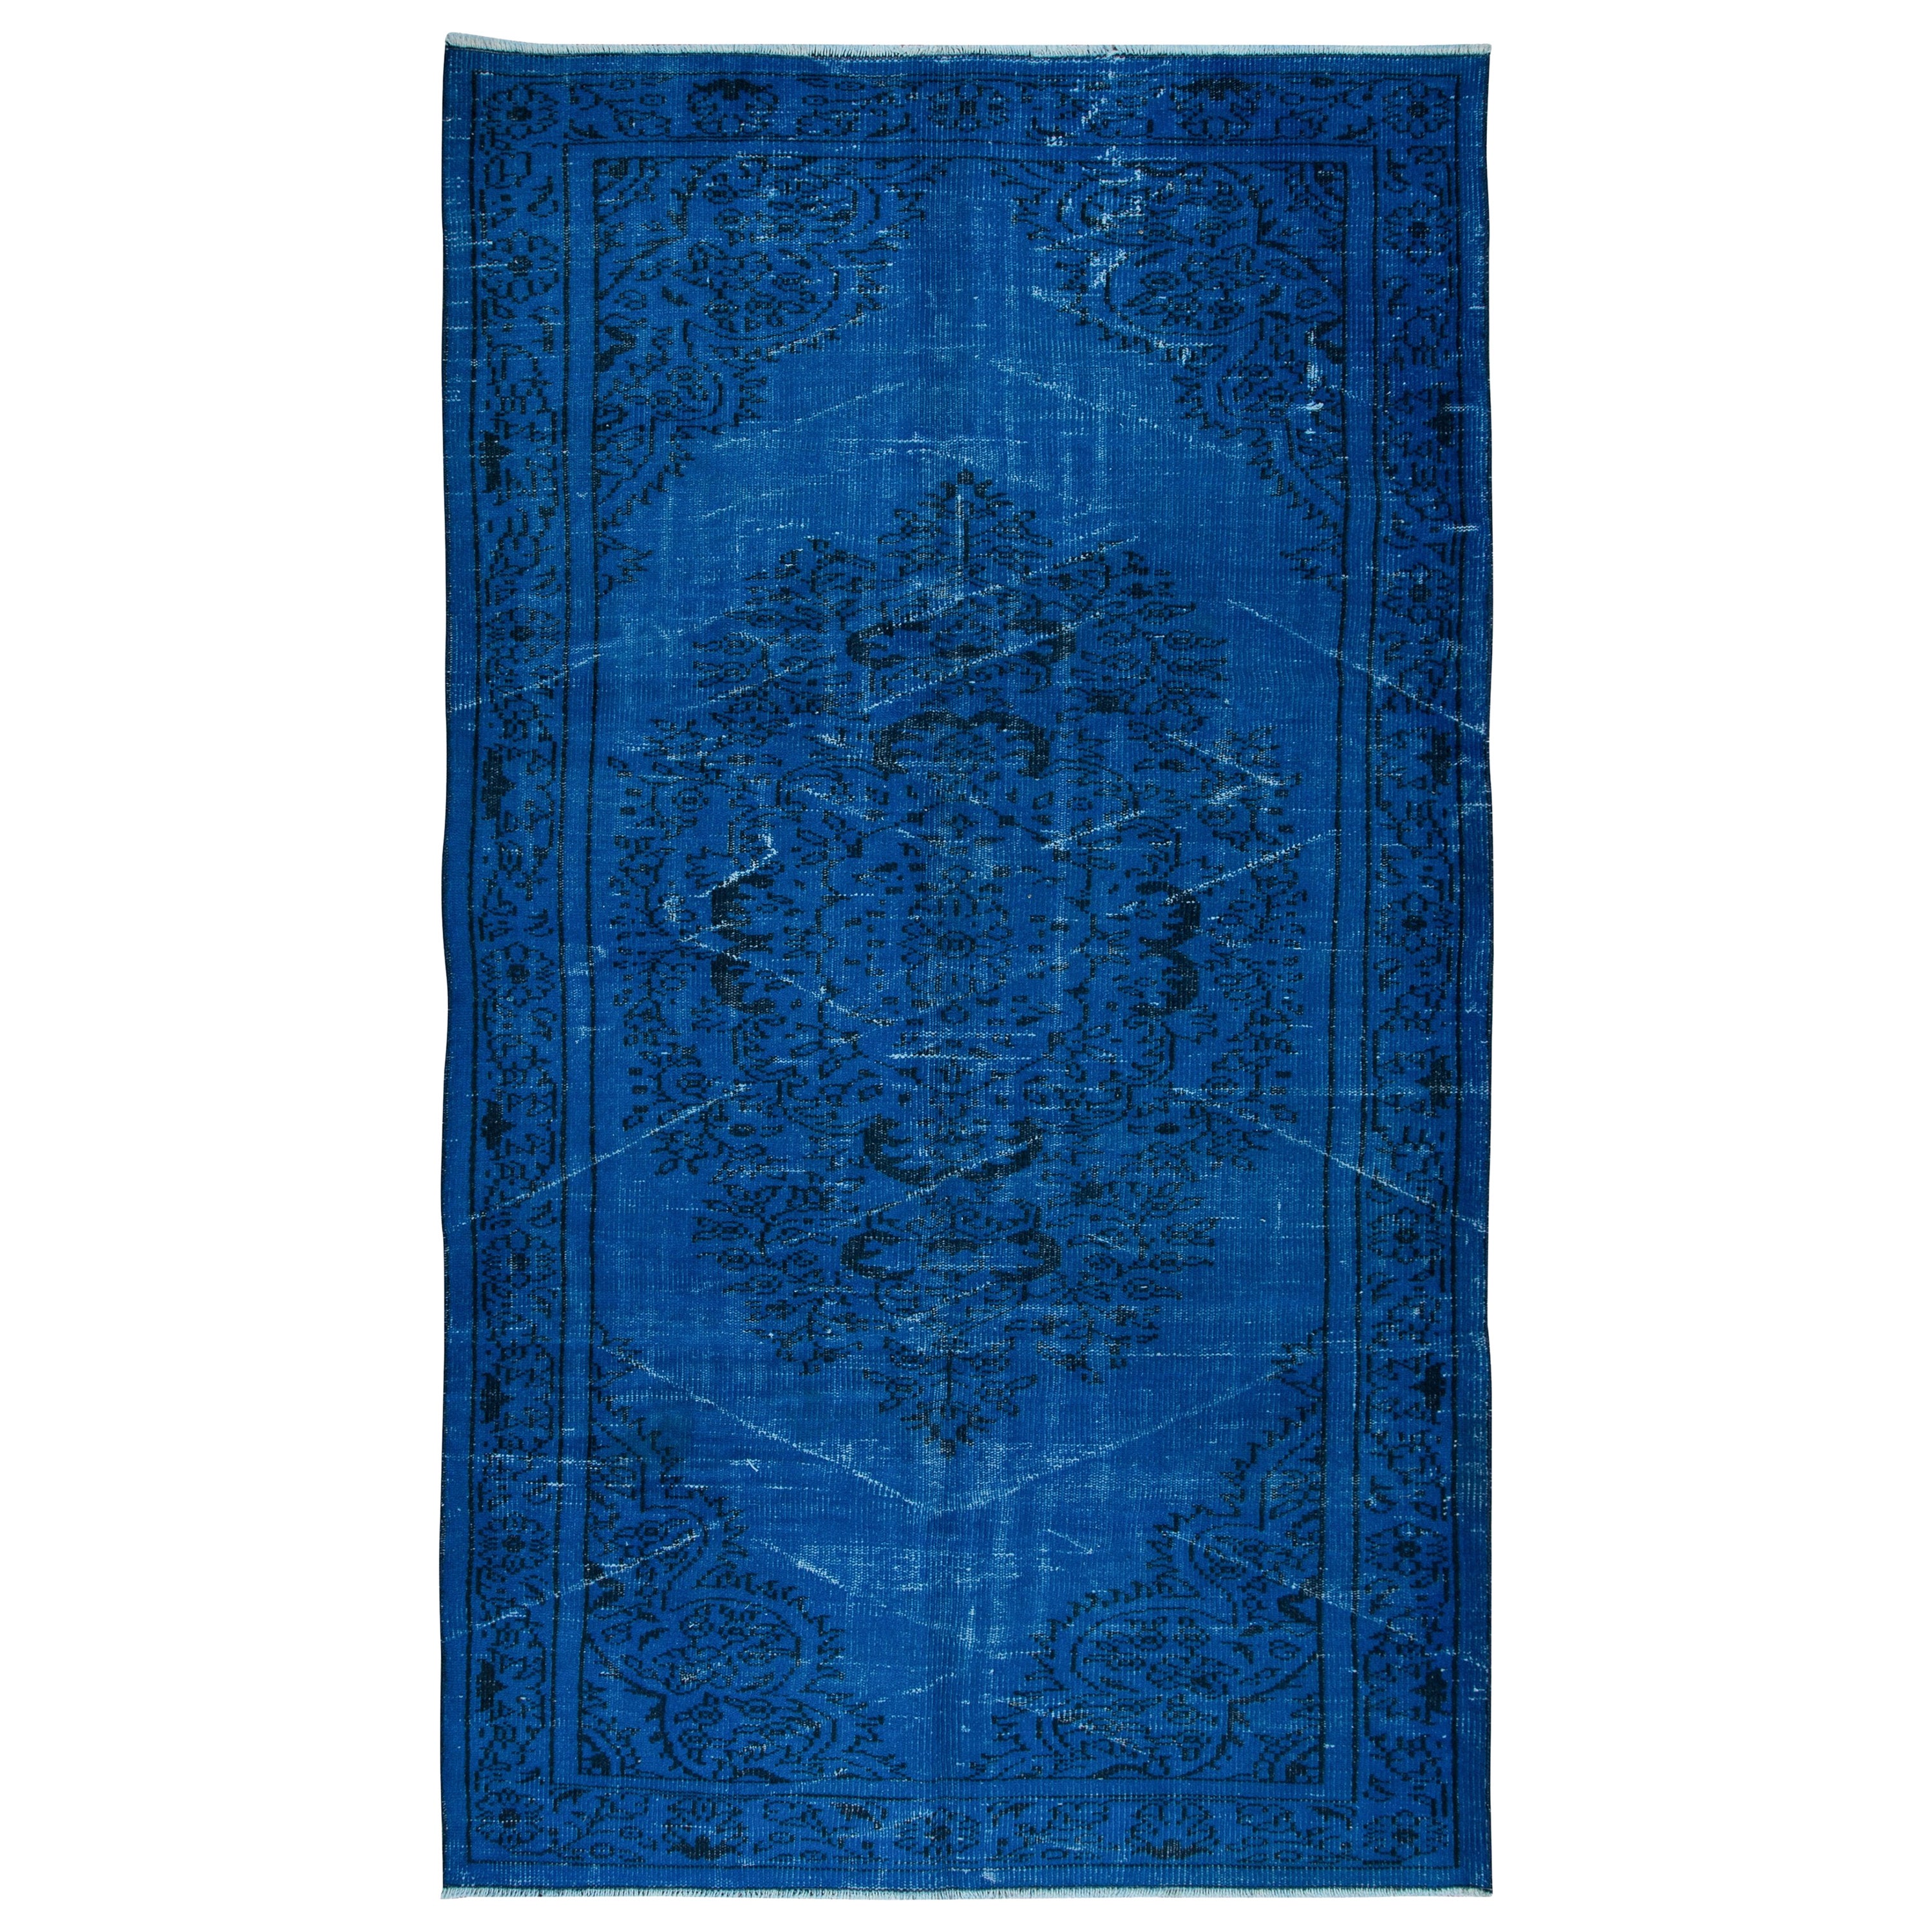 5x8.7 Ft Overdyed Wool Blue Area Rug, Handmade in Turkey, Modern Upcycled Carpet For Sale